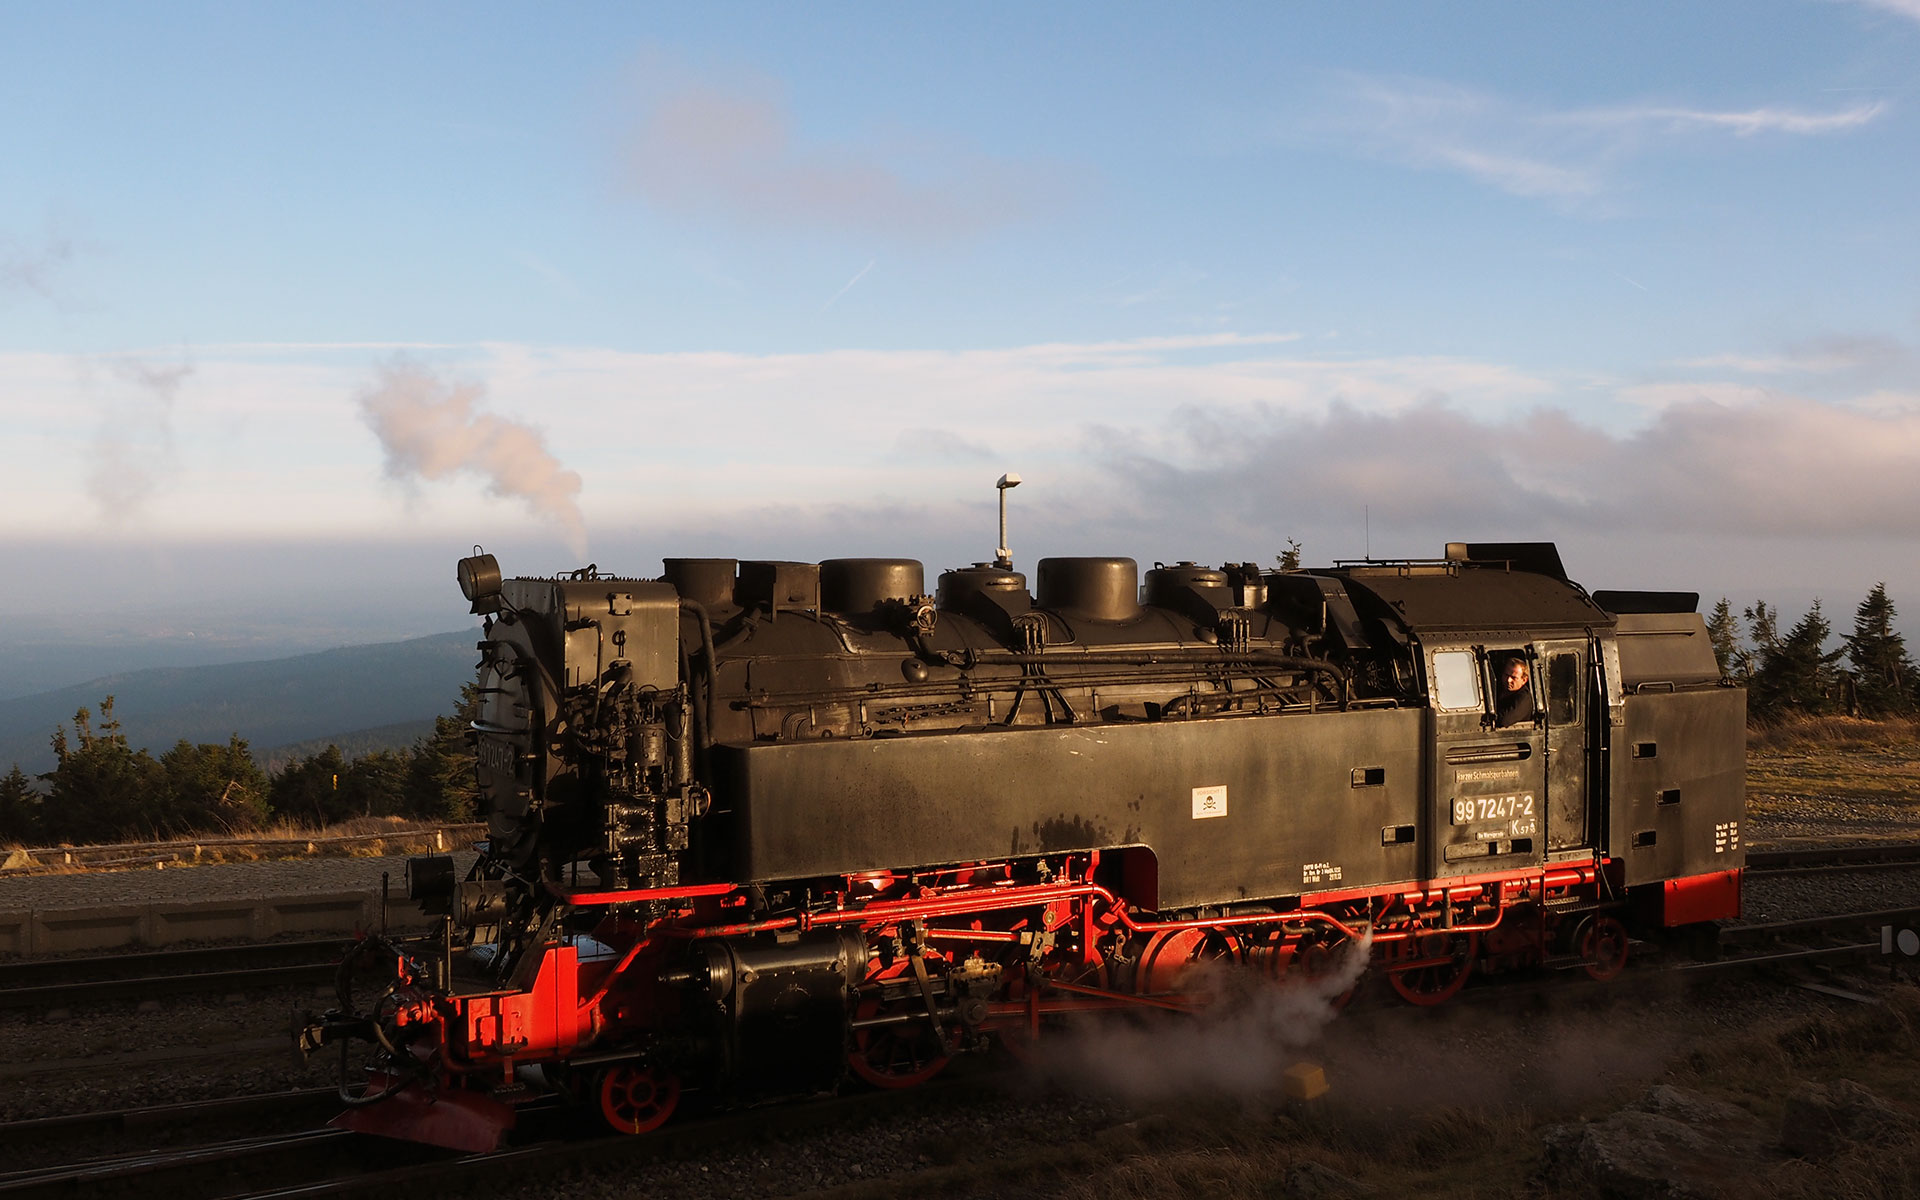 During the summer 2015 season there will be 11 scheduled trains each day to the top of Germany's Brocken mountain - all of them steam-hauled (photo © hidden europe).